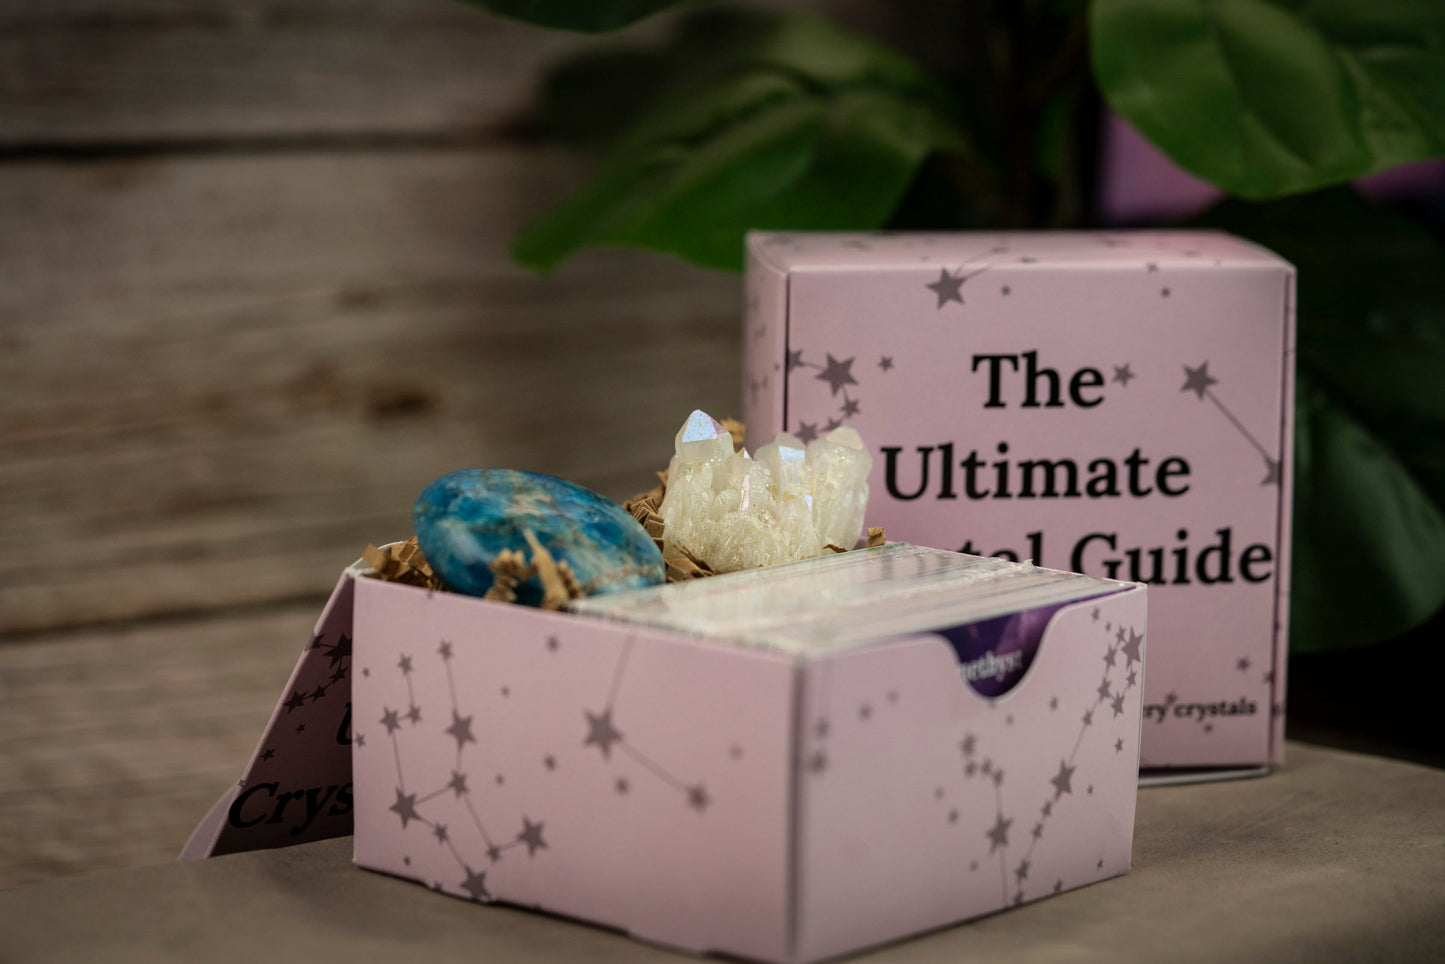 The Ultimate Crystal Guide, Learn About Crystals, Mystery Crystals, Info Cards